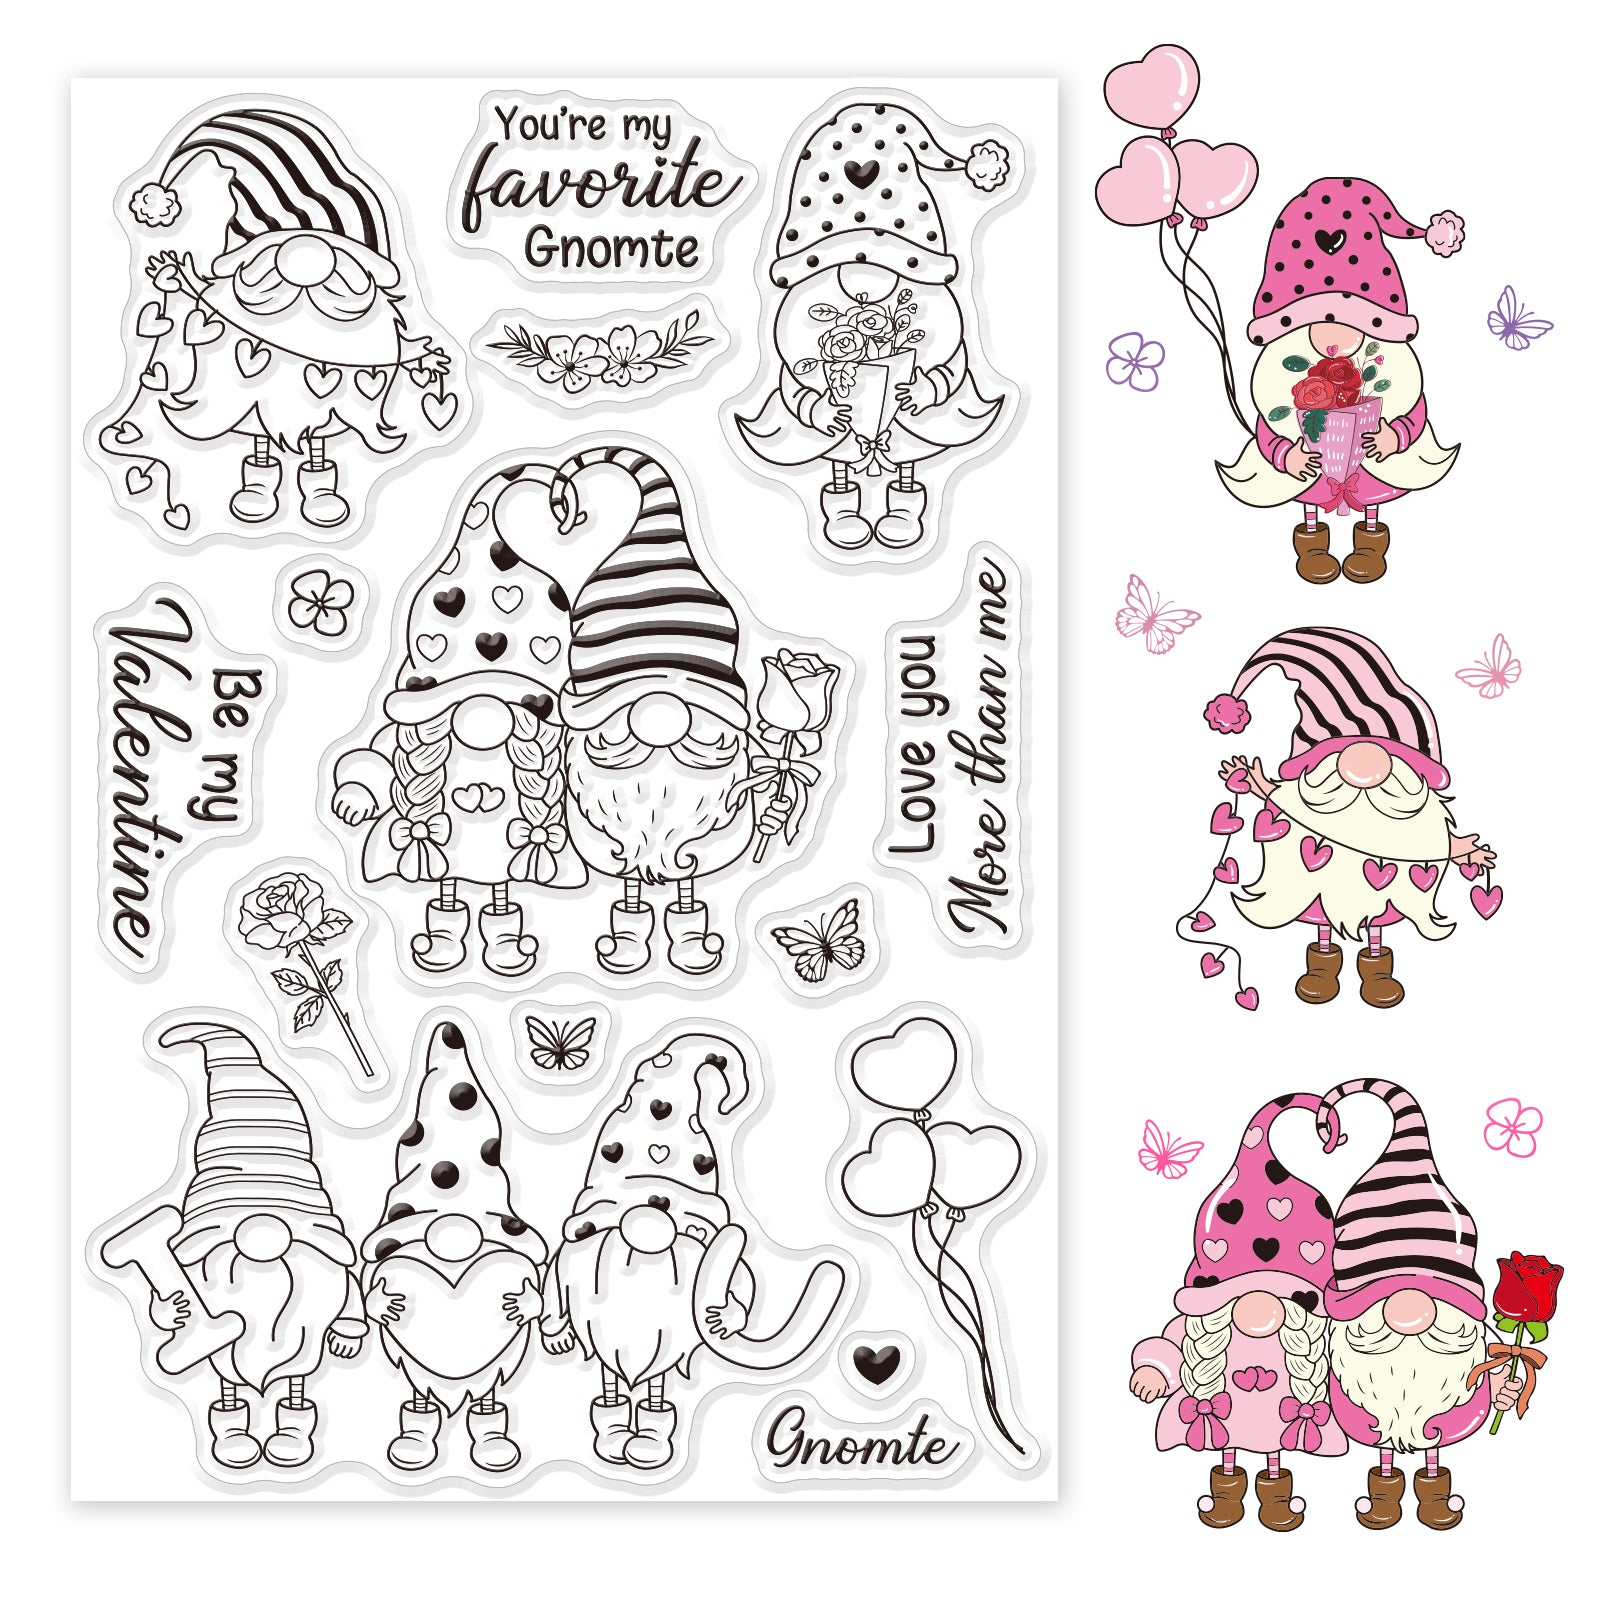 Gnome Elf, Valentine, Love Gnomes, Roses Clear Silicone Stamp Seal for Card Making Decoration and DIY Scrapbooking